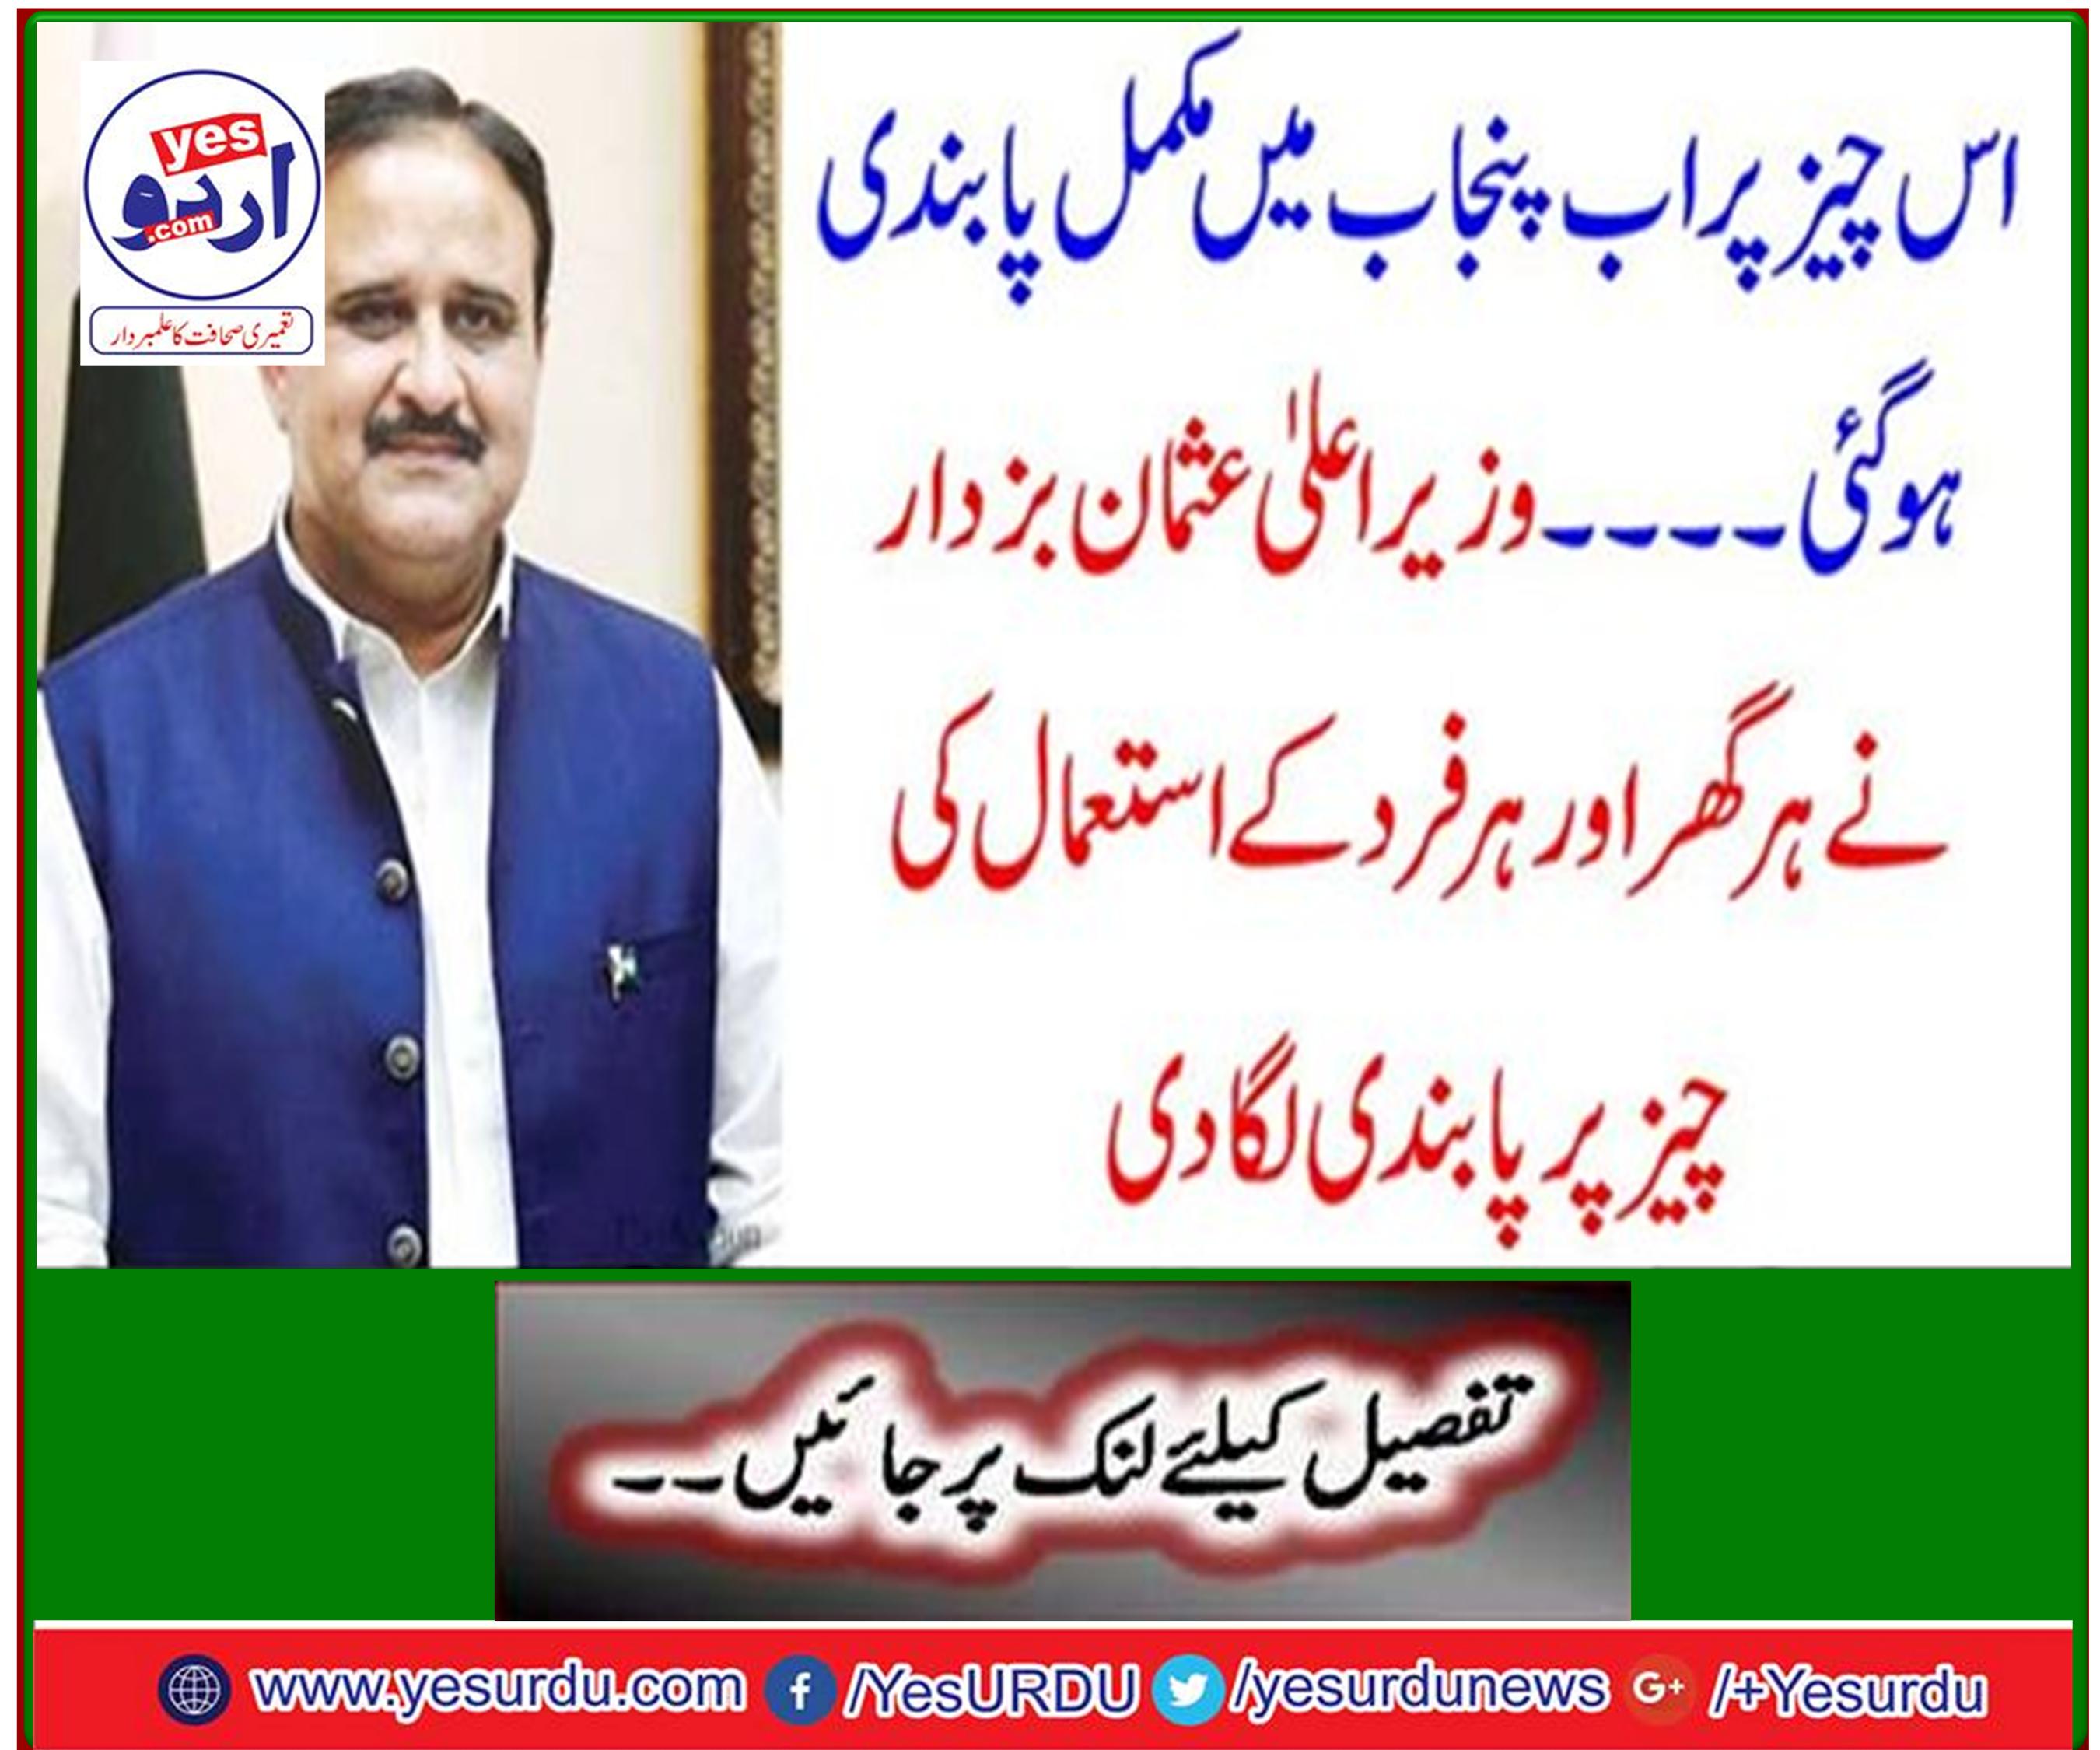 Chief Minister Usman Bazdar banned the use of every house and every person